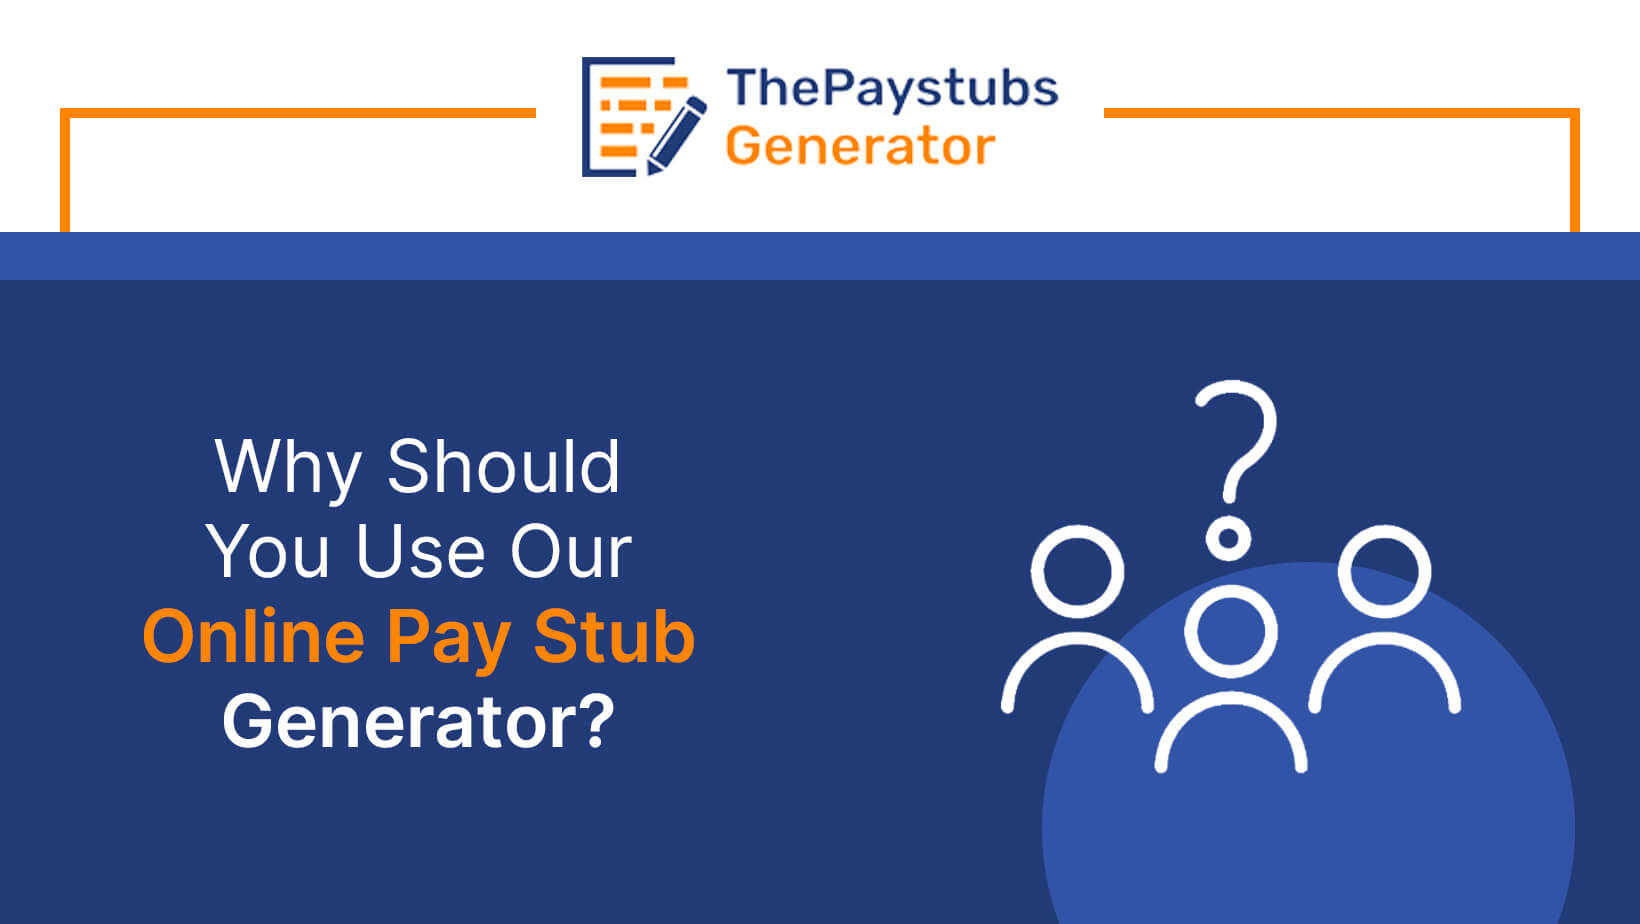 Why Should You Use Our Online Pay Stub Generator?